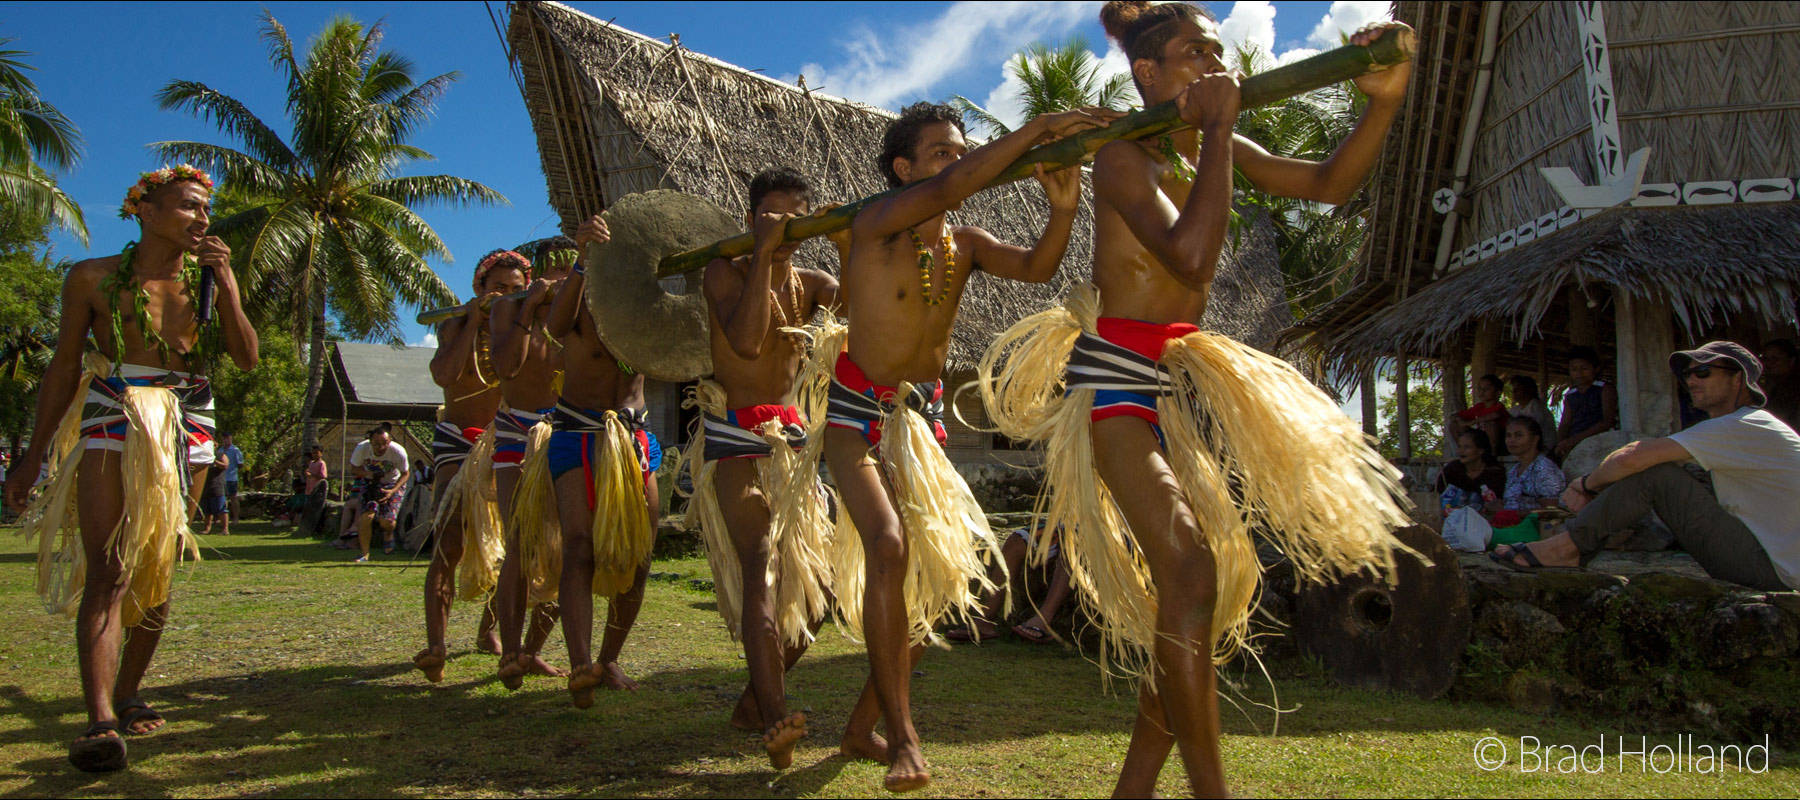 Yapese traditional culture festival